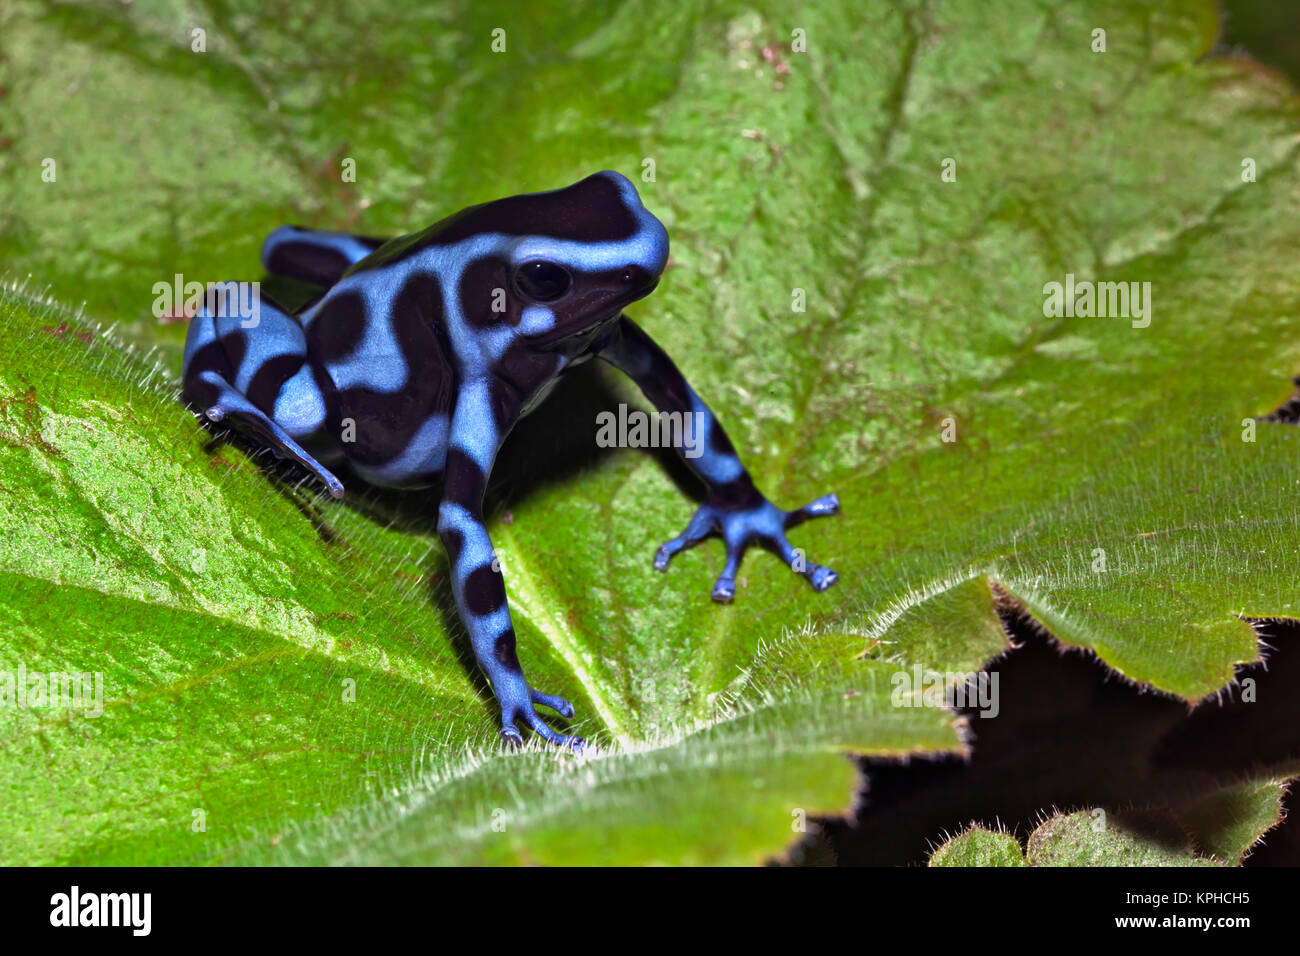 Blue and black Poison Dart Frog (Dendrobates auratus), native to Costa Rica. Stock Photo